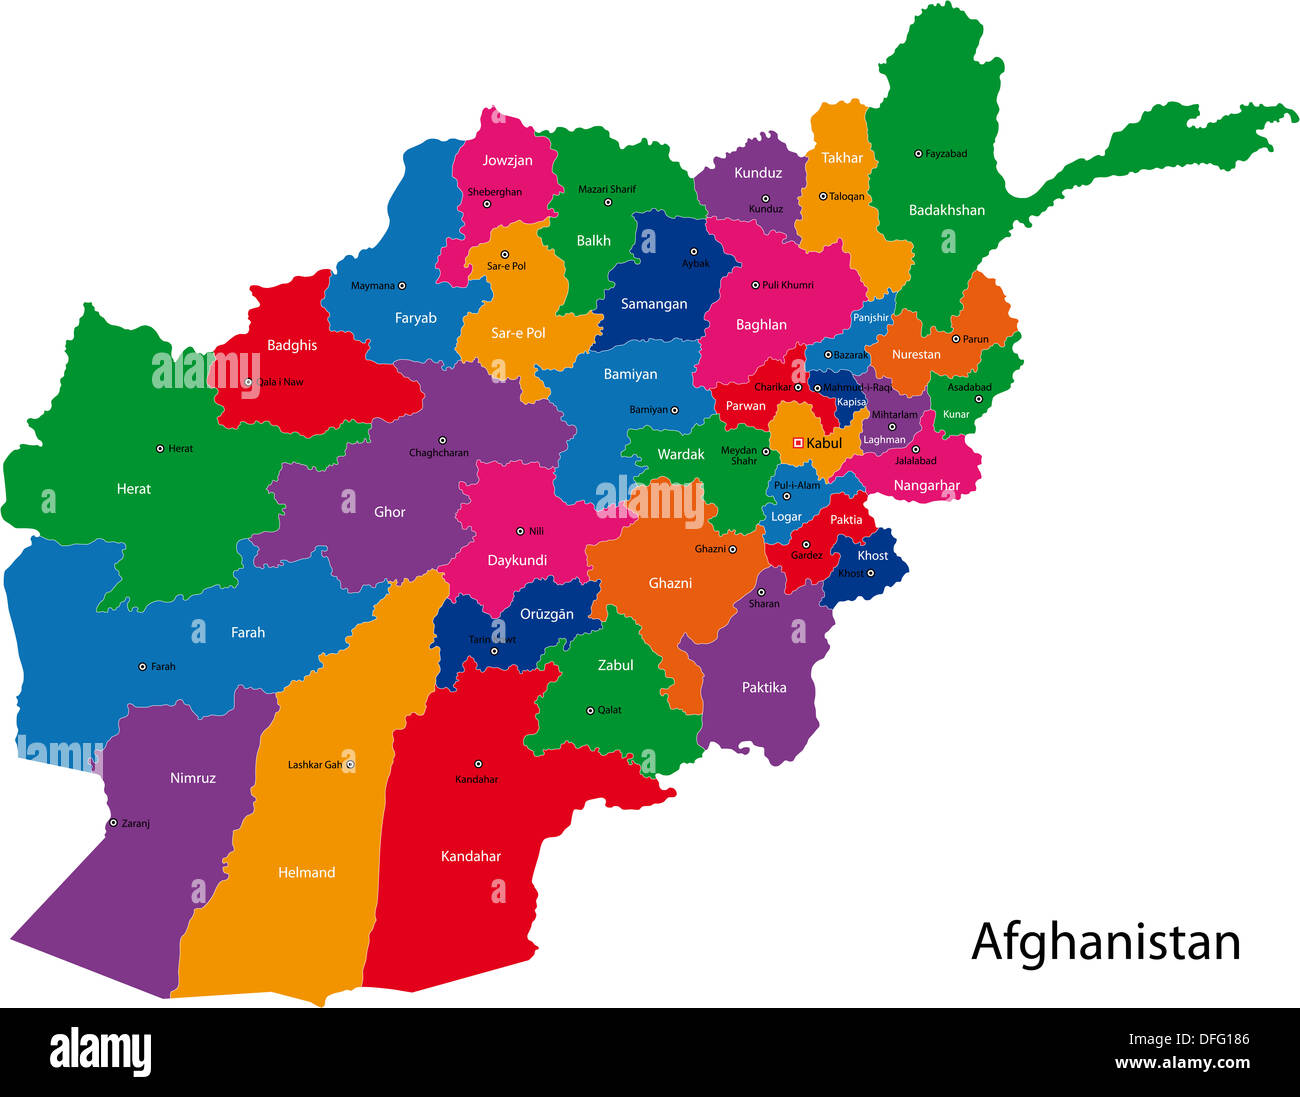 Afghanistan map Stock Photo